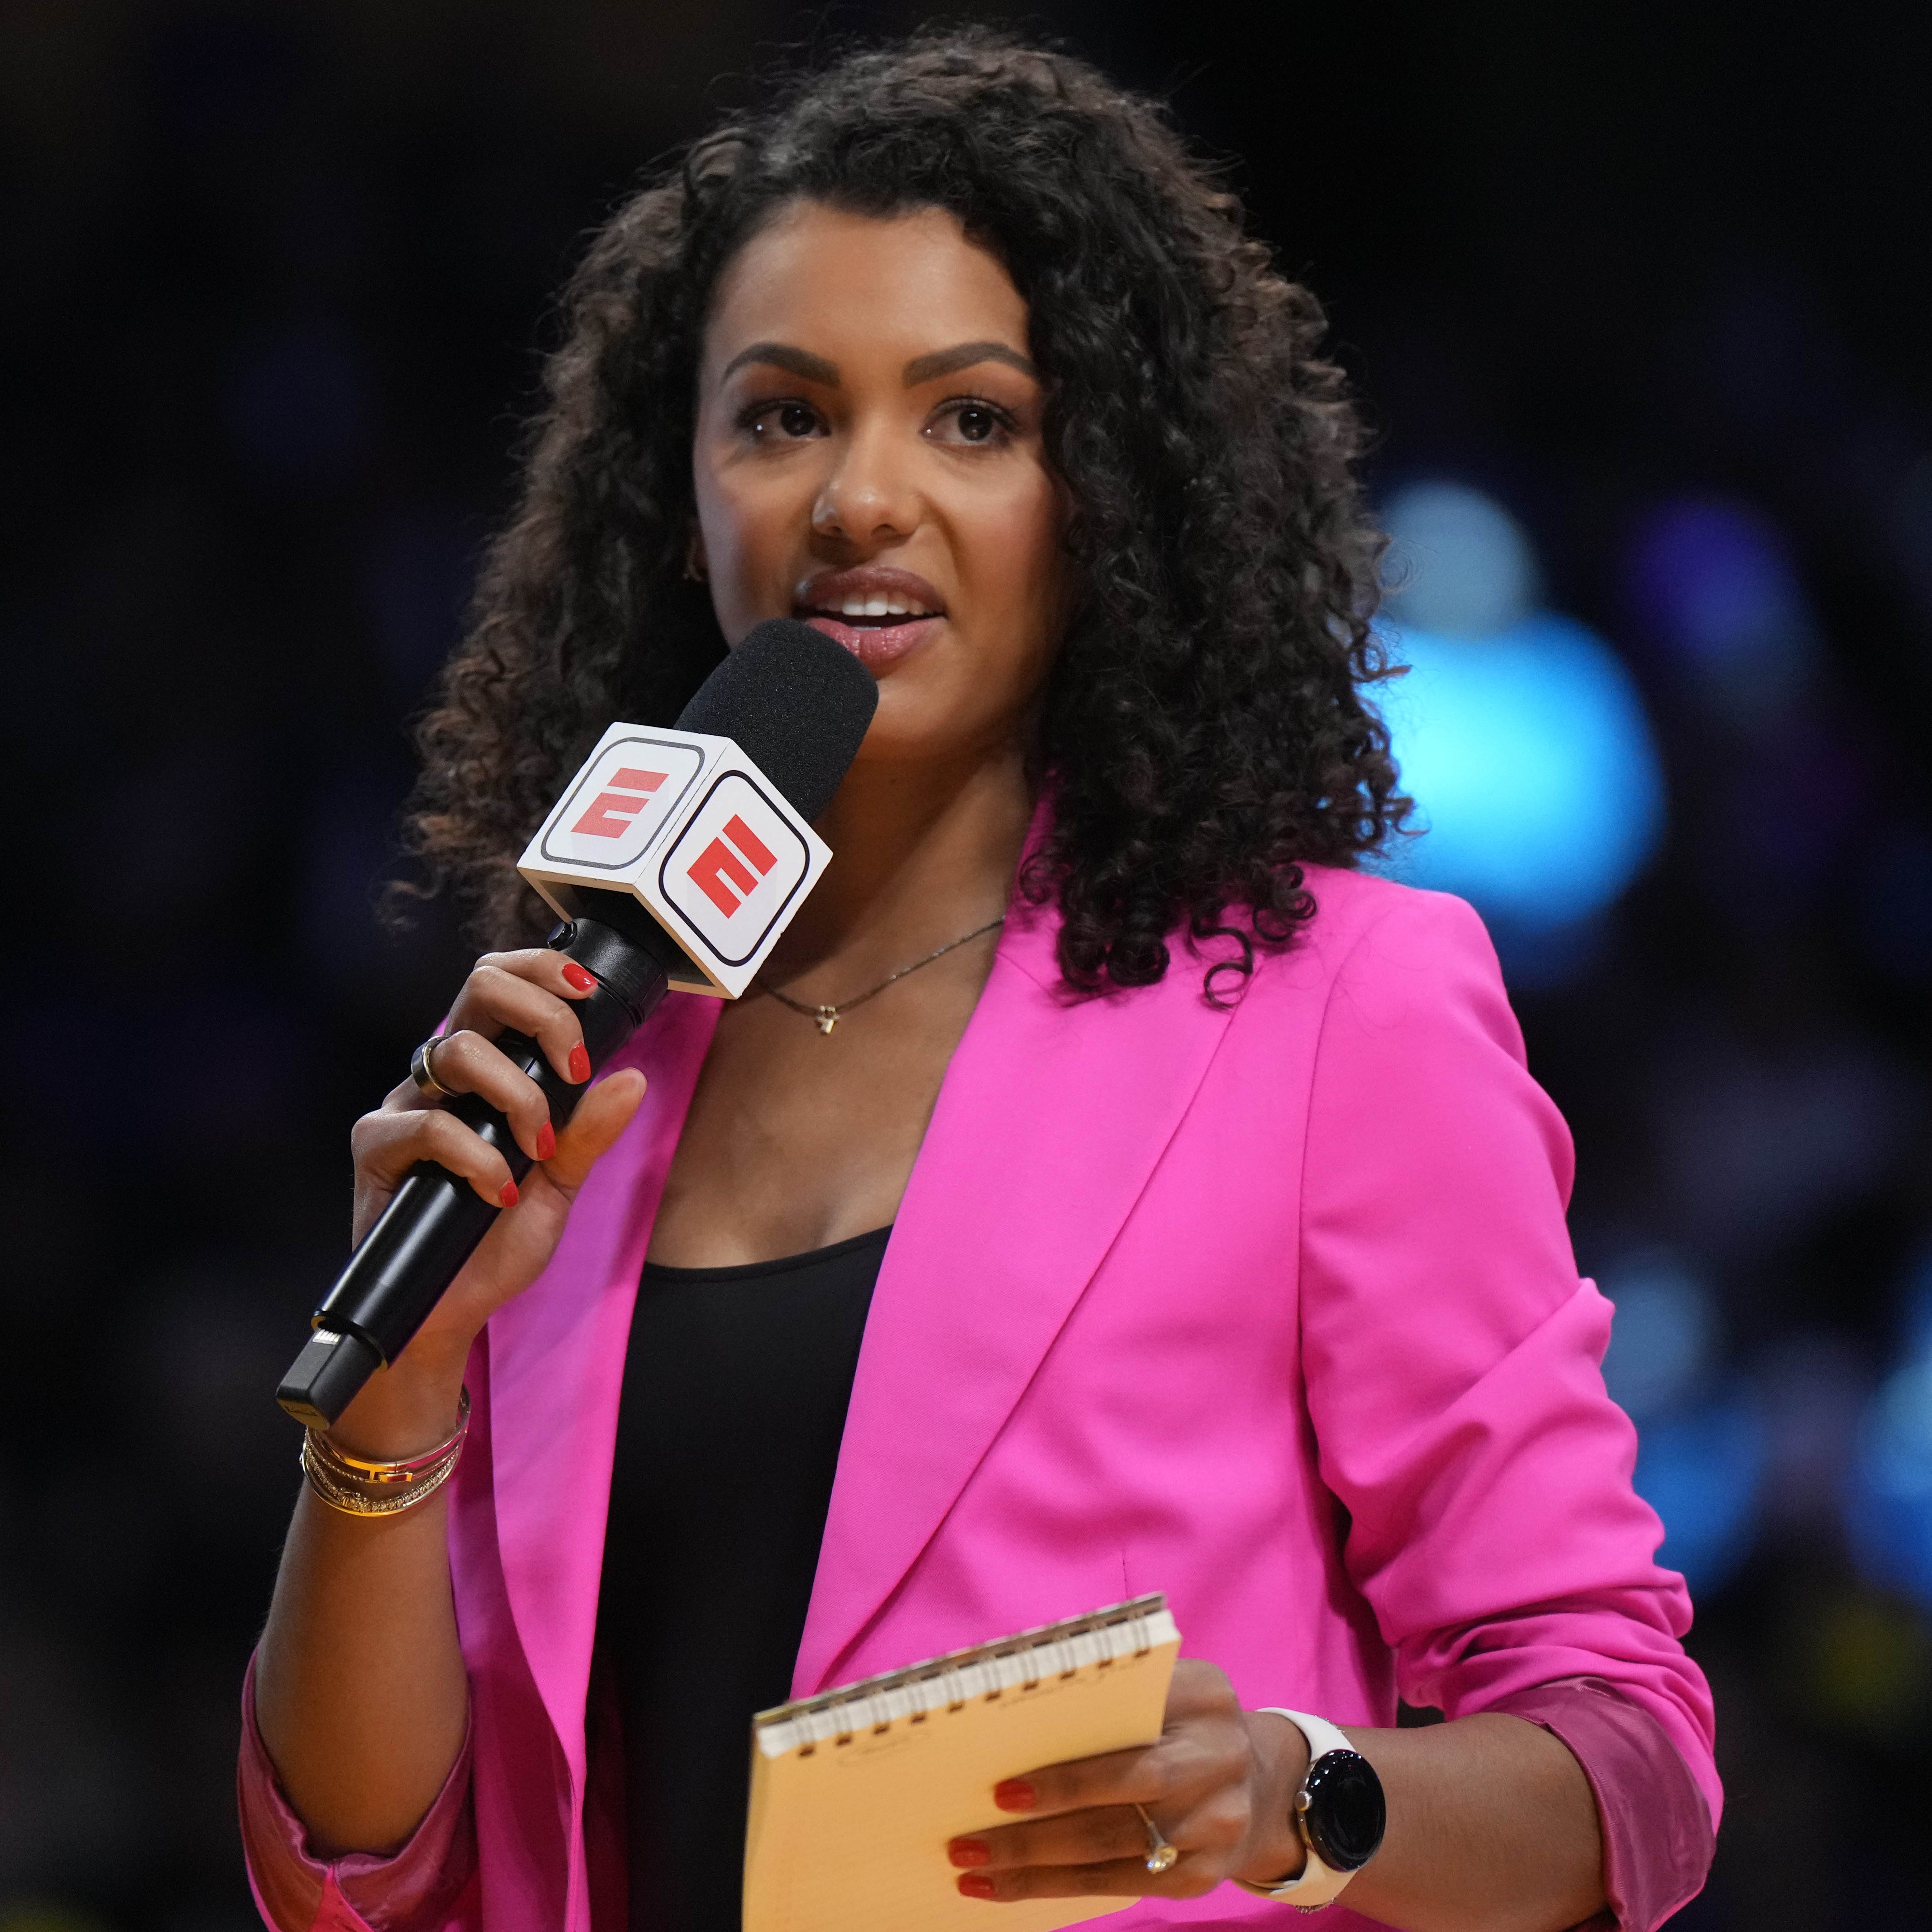 ESPN sideline reporter Malika Andrews during a regular season game between the Los Angeles Lakers and the New York Knicks at Crypto.com Arena.